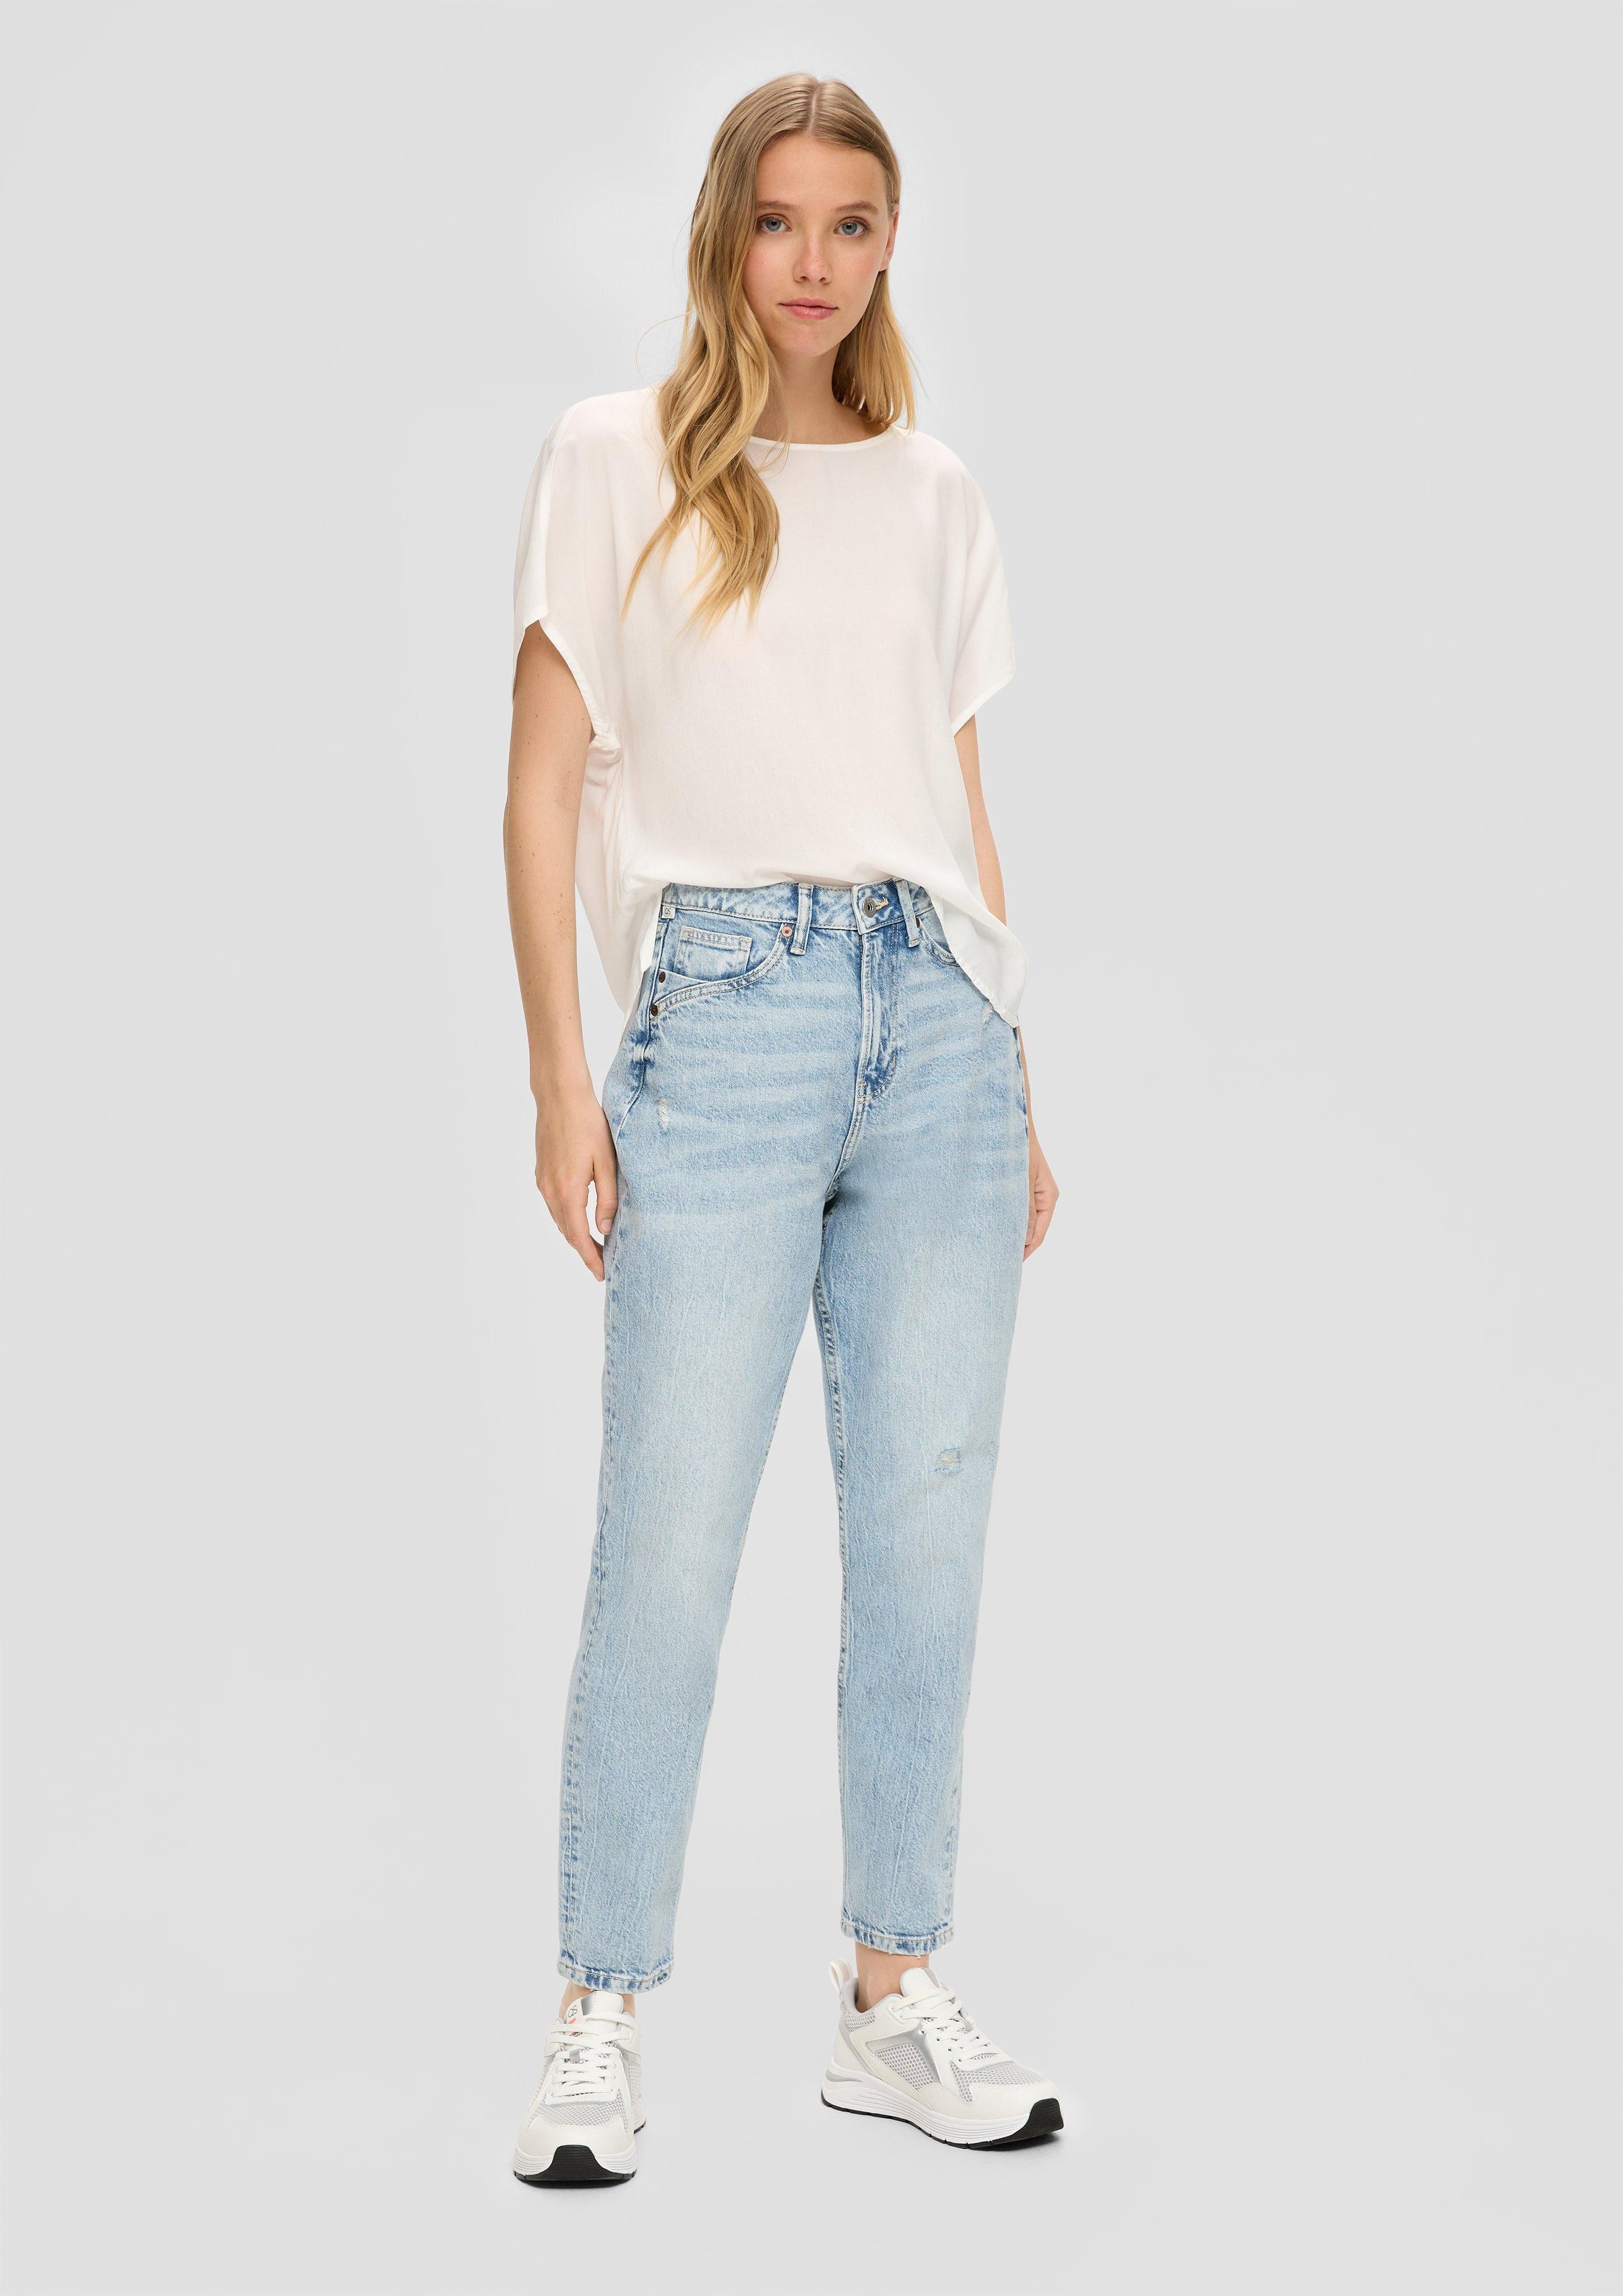 QS 7/8-Hose Ankle-Jeans Mom / Relaxed fit / High rise / Tapered leg Waschung